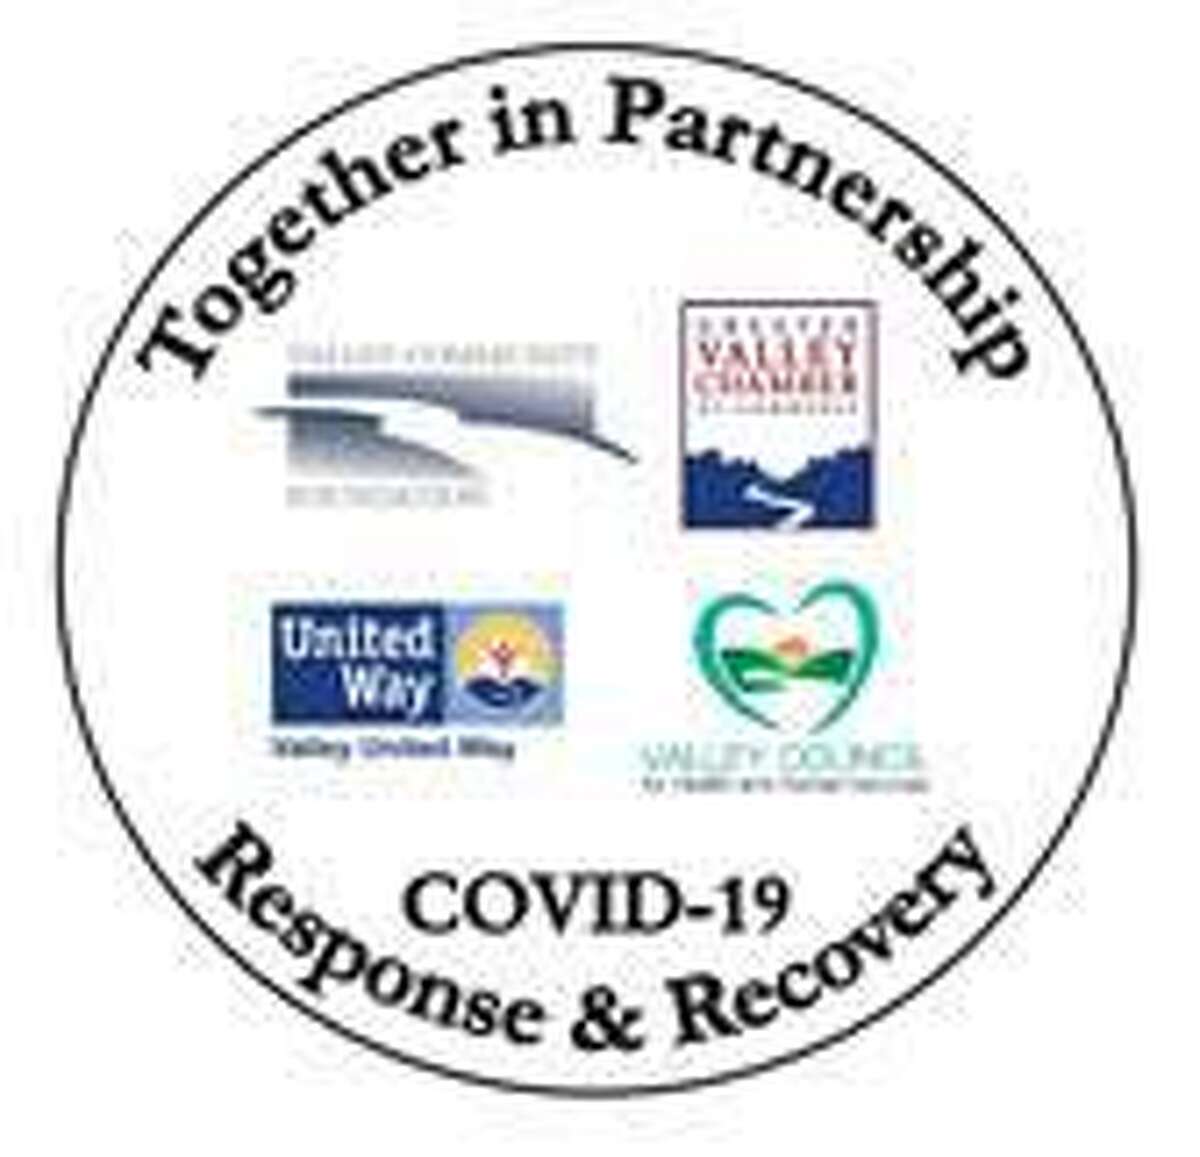 More than $78,000 worth of grants from the Valley Community COVID-19 Response and Recovery Fund have been distributed to 18 organizations.